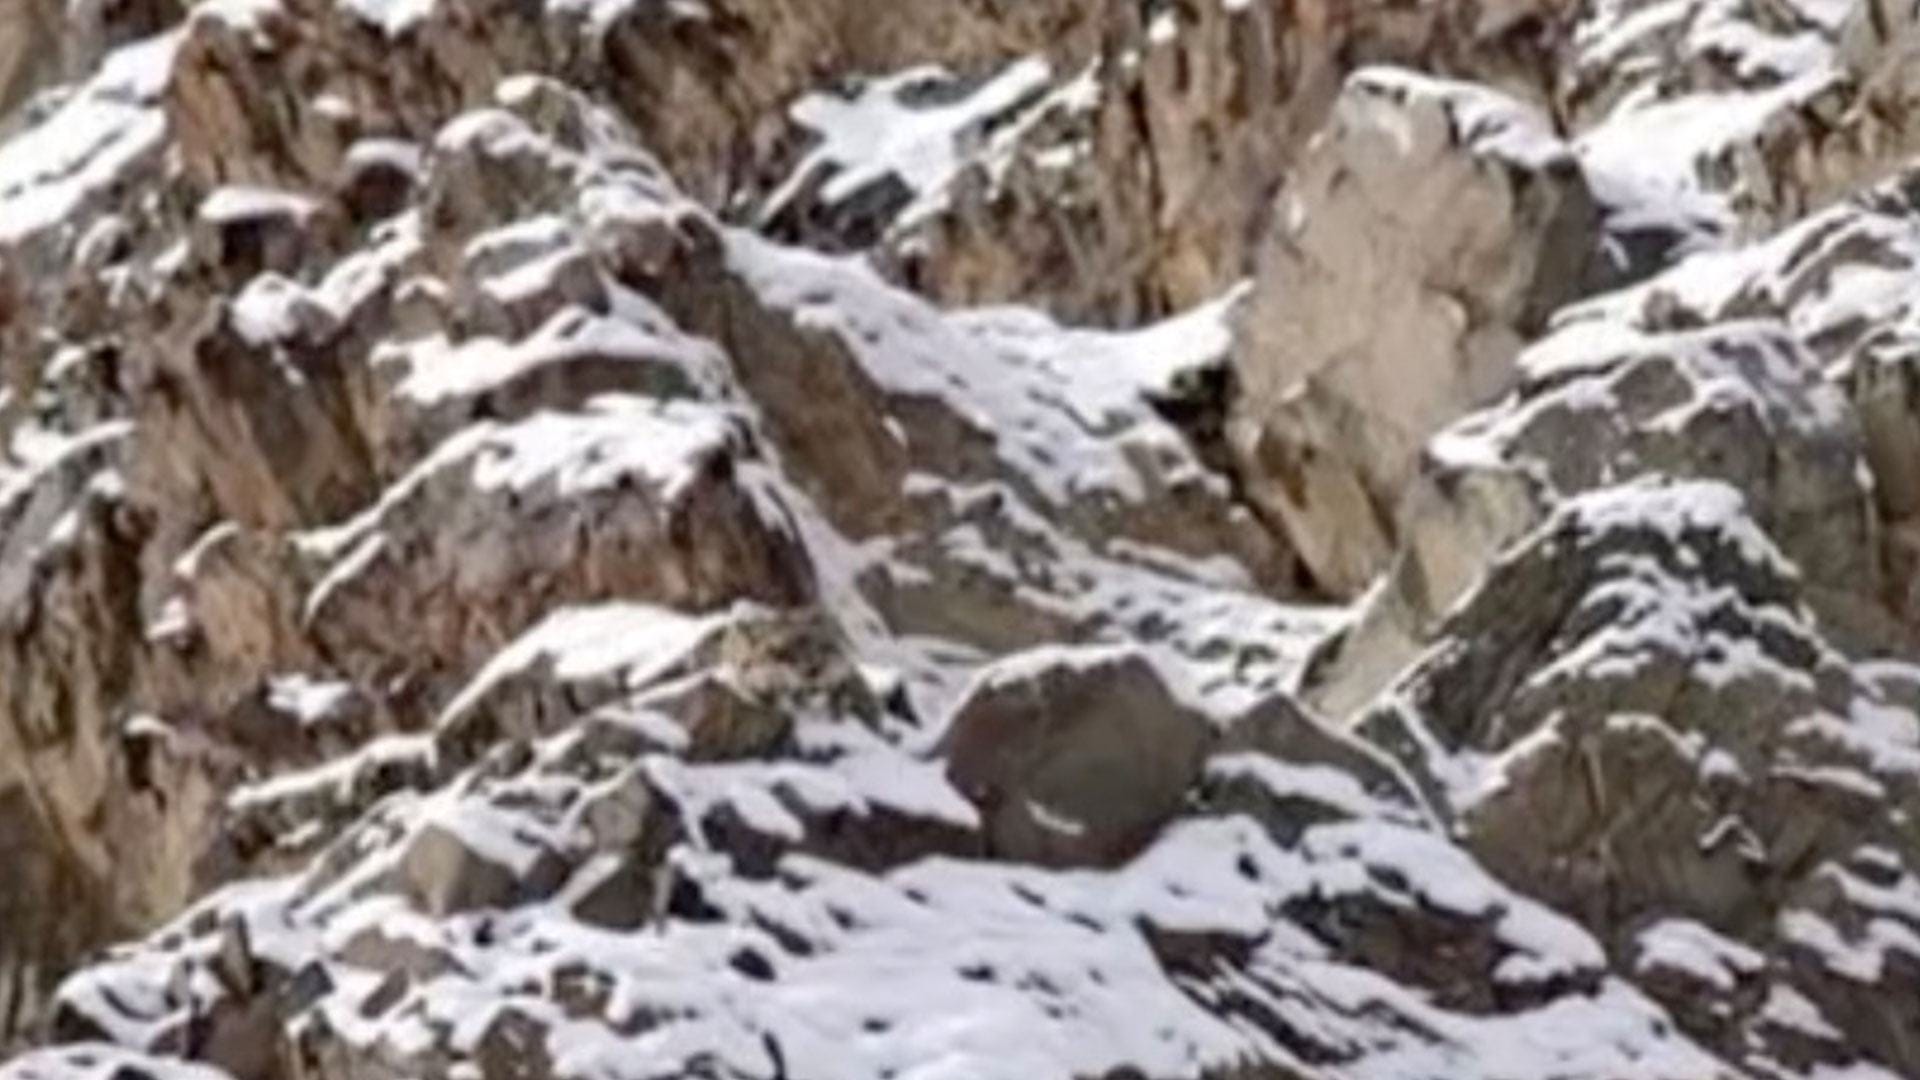 You have the eyes of a hawk if you can see a snow leopard clearly hiding on a mountain in 10 seconds.